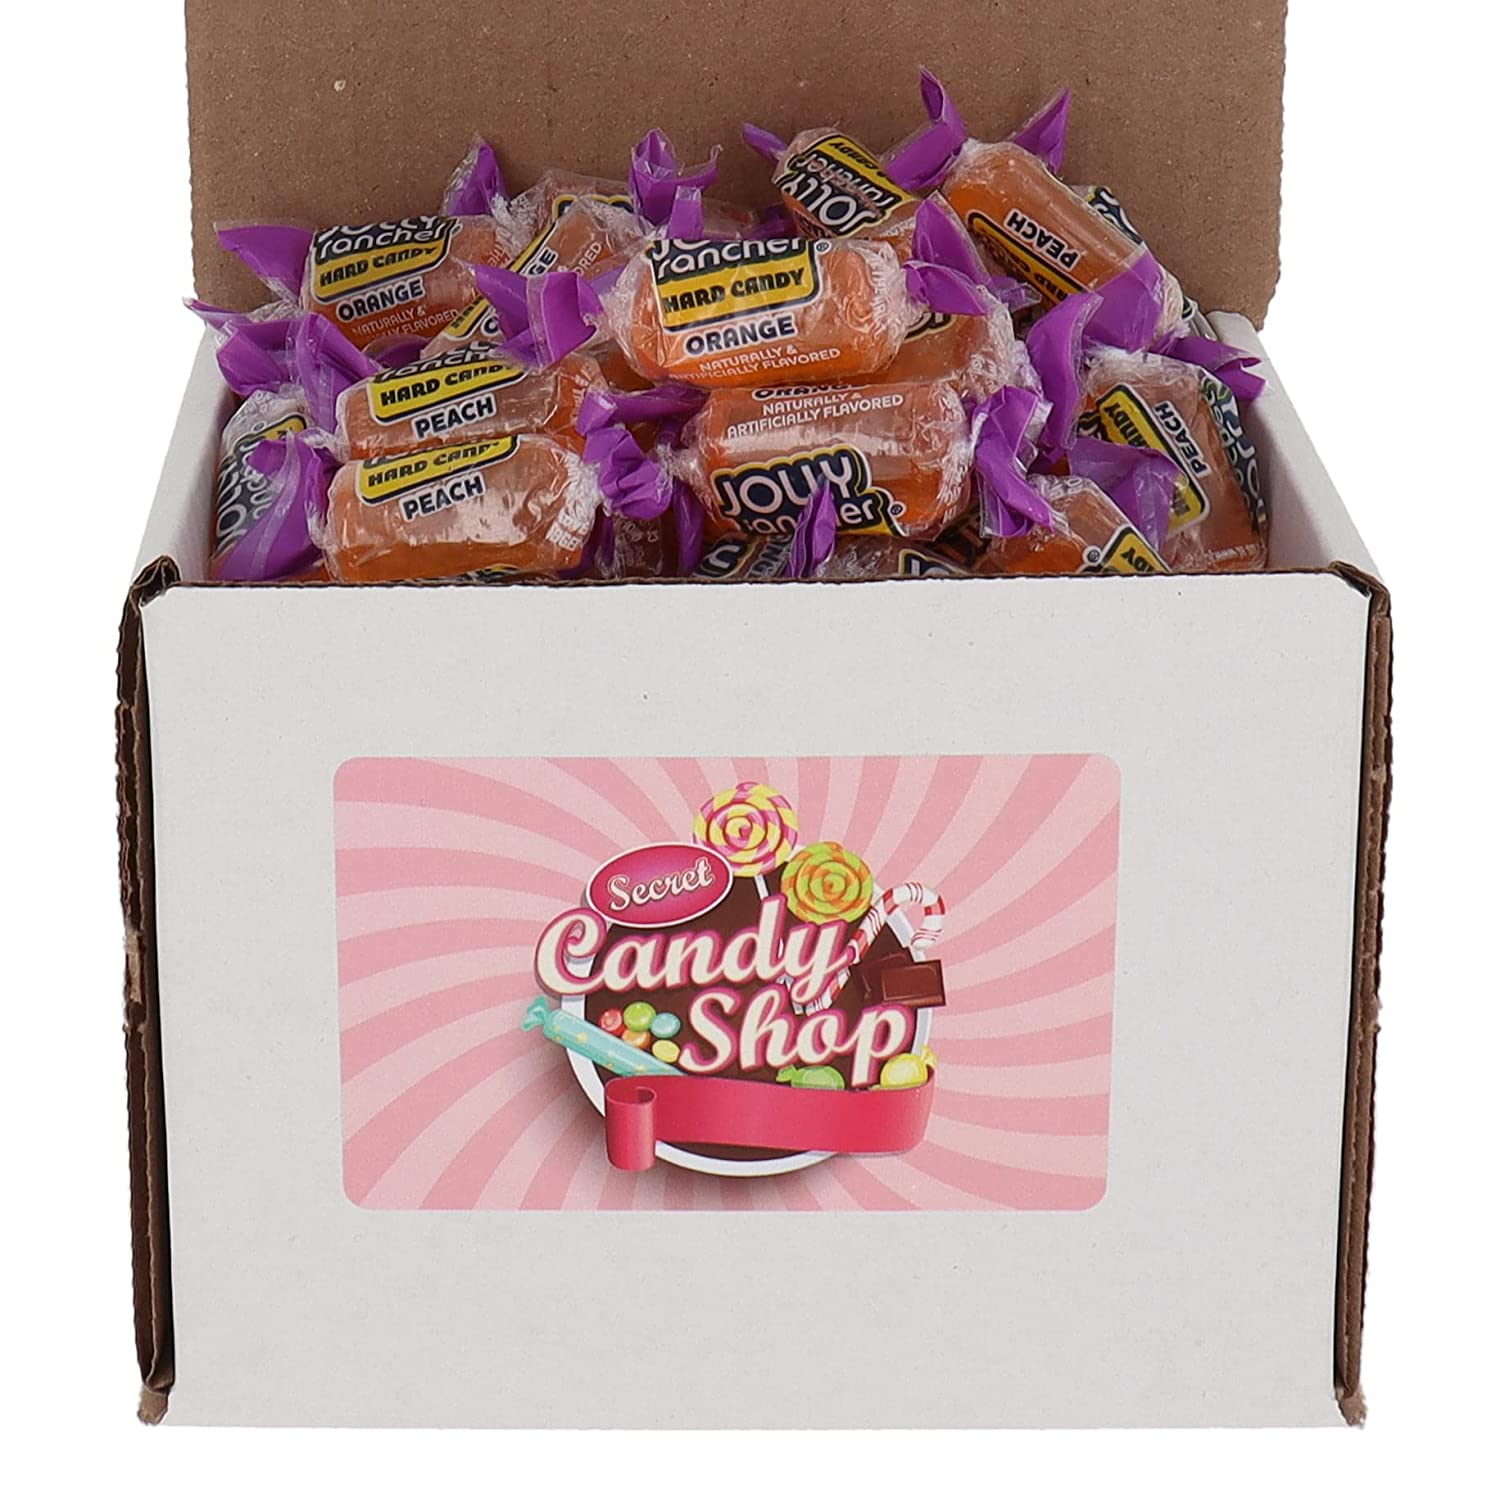 Jolly Rancher Hard Candy in Box, 1lb (Individually Wrapped)